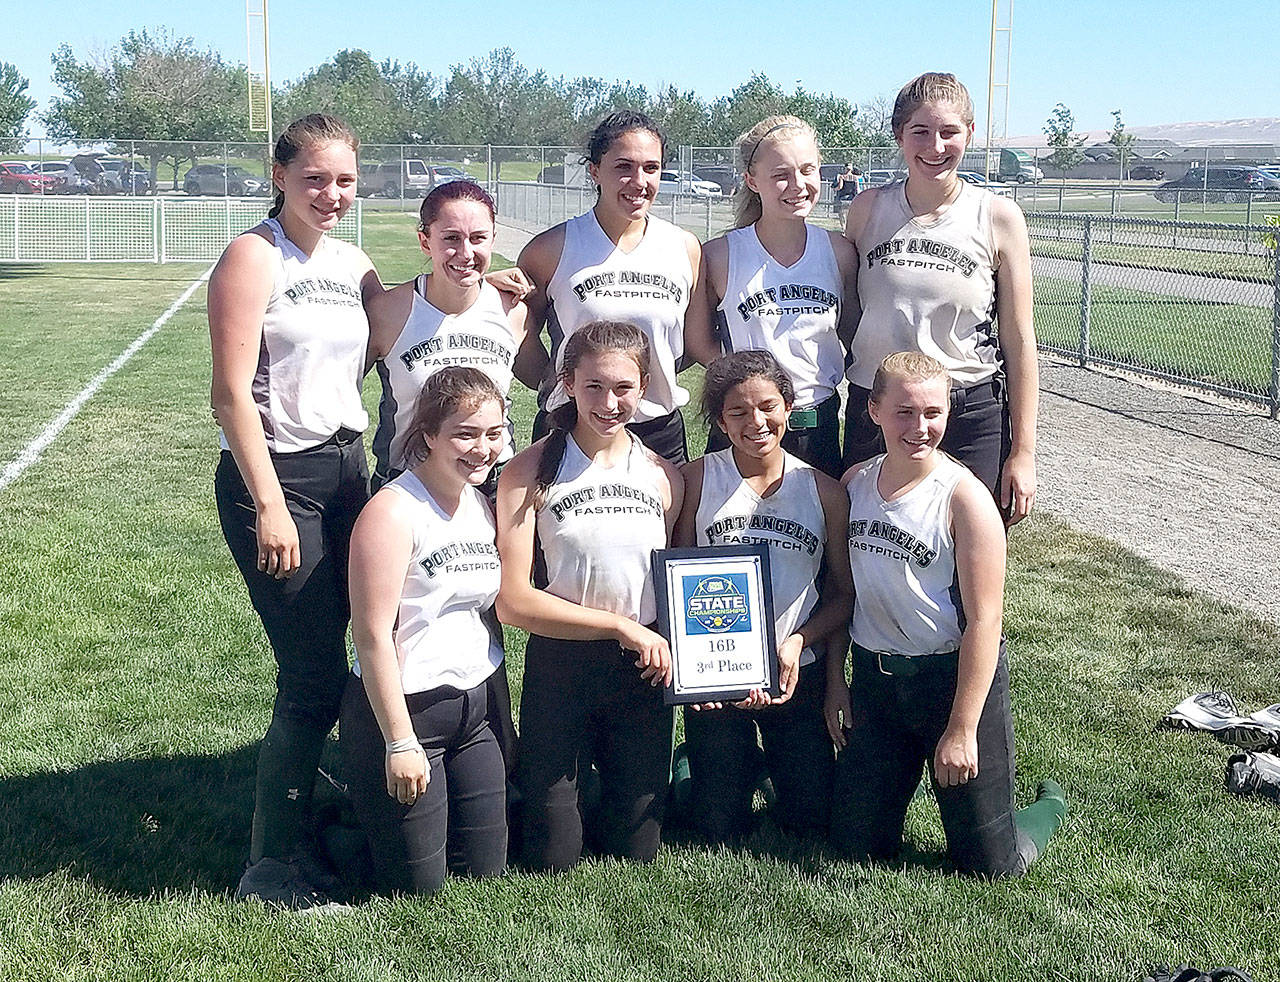 The Port Angeles Illusion 16U team after finishing third at the NSA State Tournament in Tri Cities. Back Row, from left, are Jada Cargo Acosta, Hunter Humbert, Lucah Folden, Sommer Olsen and Ava Brenkman. From left, front row, are Hailey Robinson, Ella Holland, Camille Stensgard and Emma Olsen. Not in the picture are Emi Halberg and Katie Lau. Coaches: Warren Stevens, Rick Pennington, Brian Holland